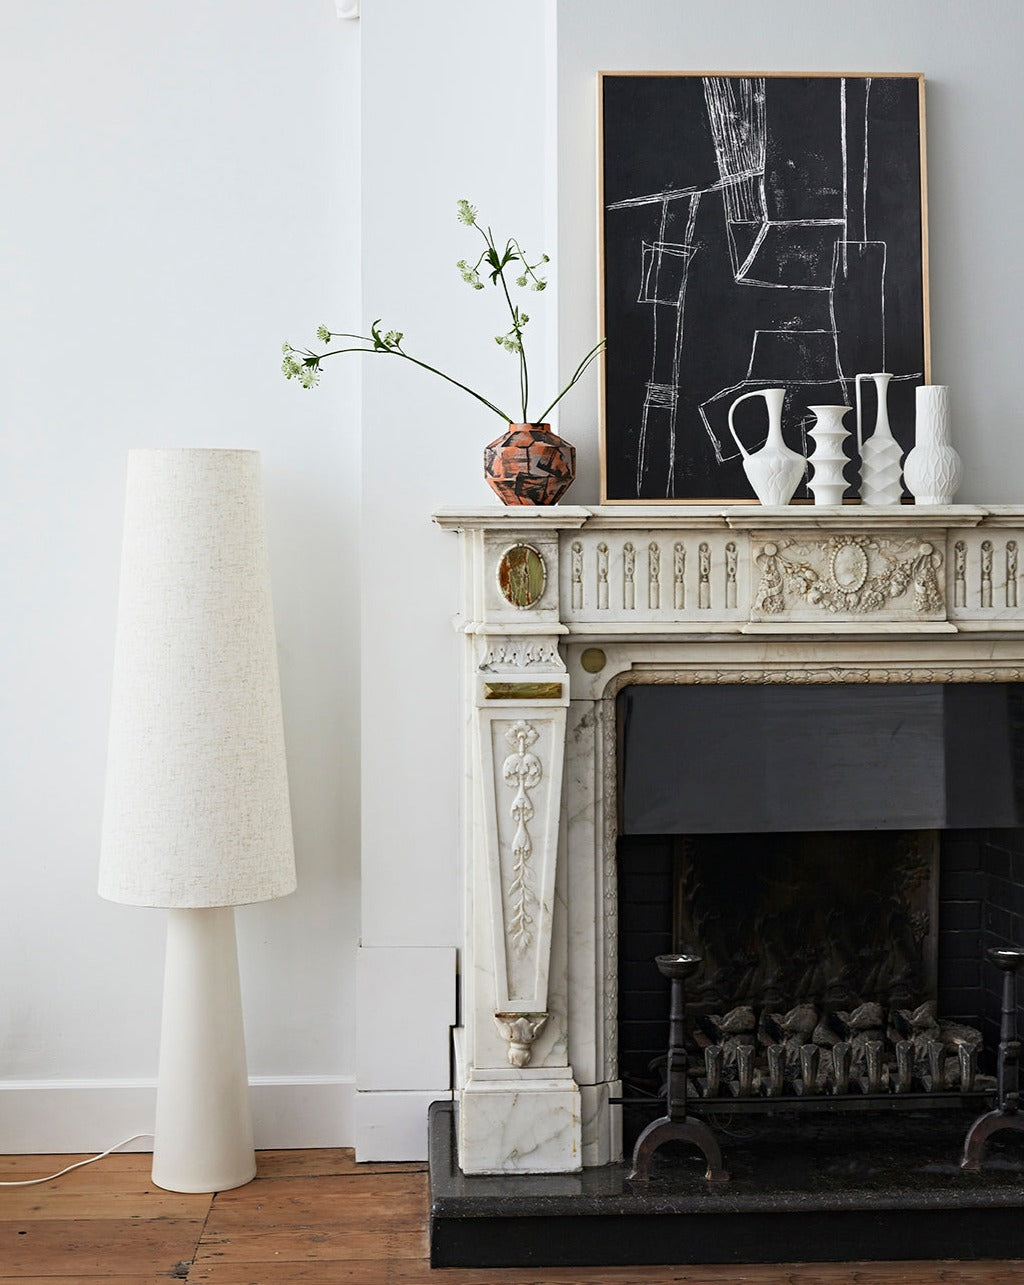 set of 4 white porcelain vases on a fire mantel in front of a black abstract painting